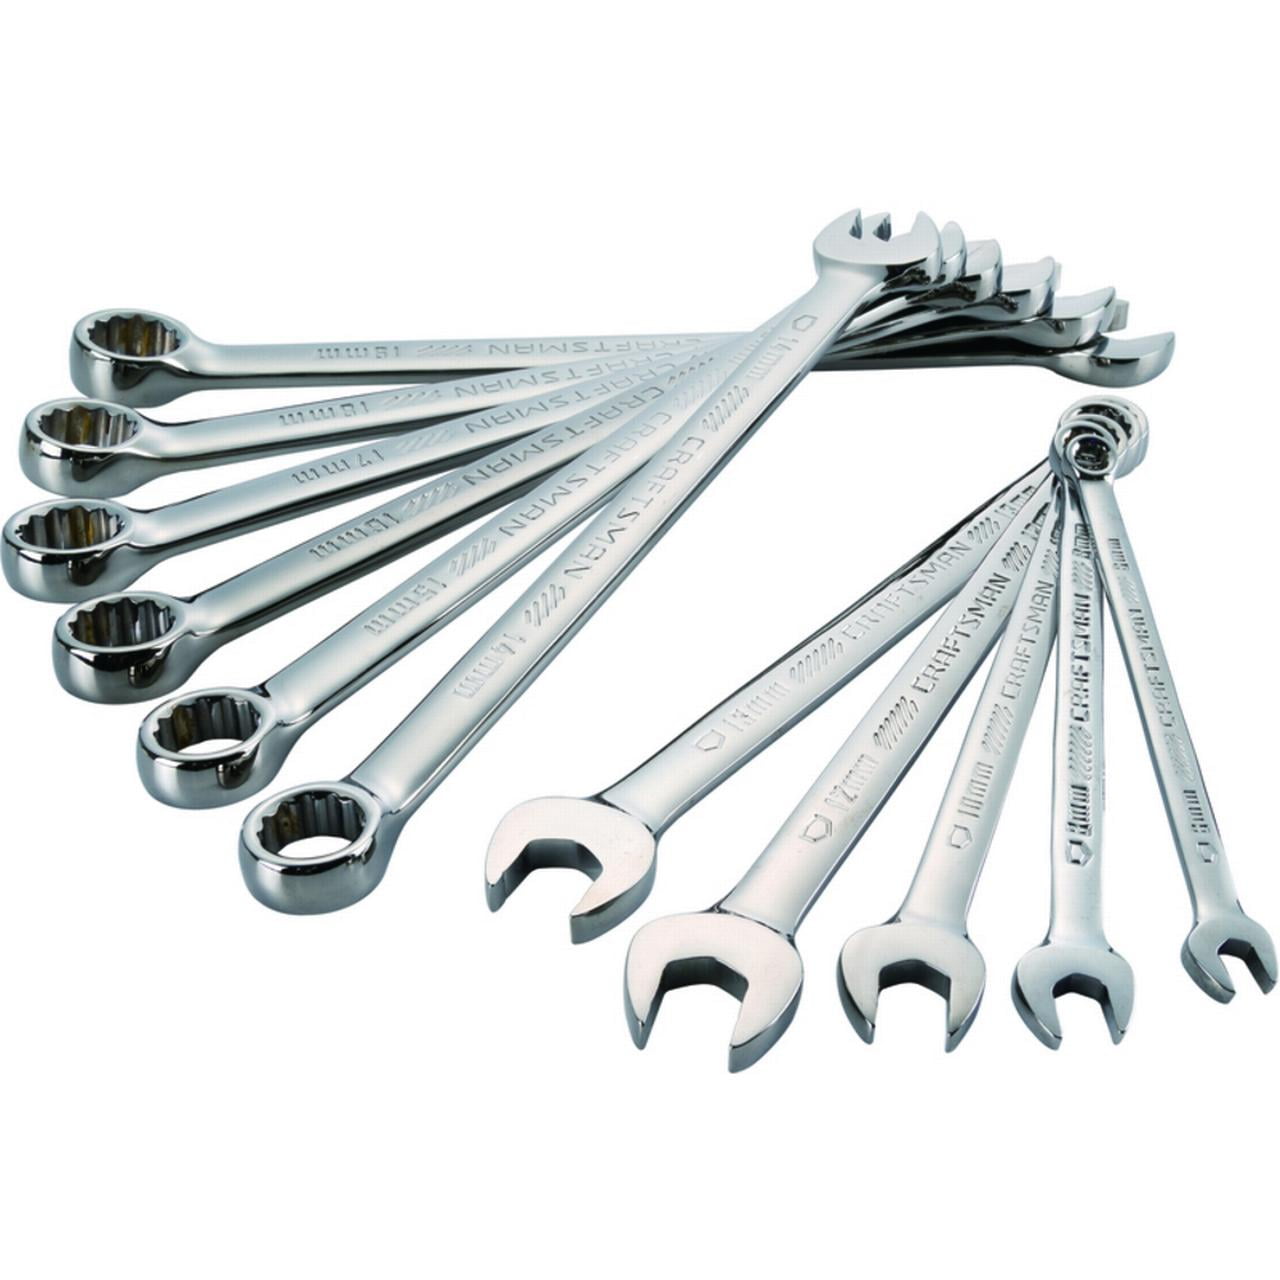 Craftsman Metric Long Panel Combination Wrench Set 11 pc. Case Of: 1; 